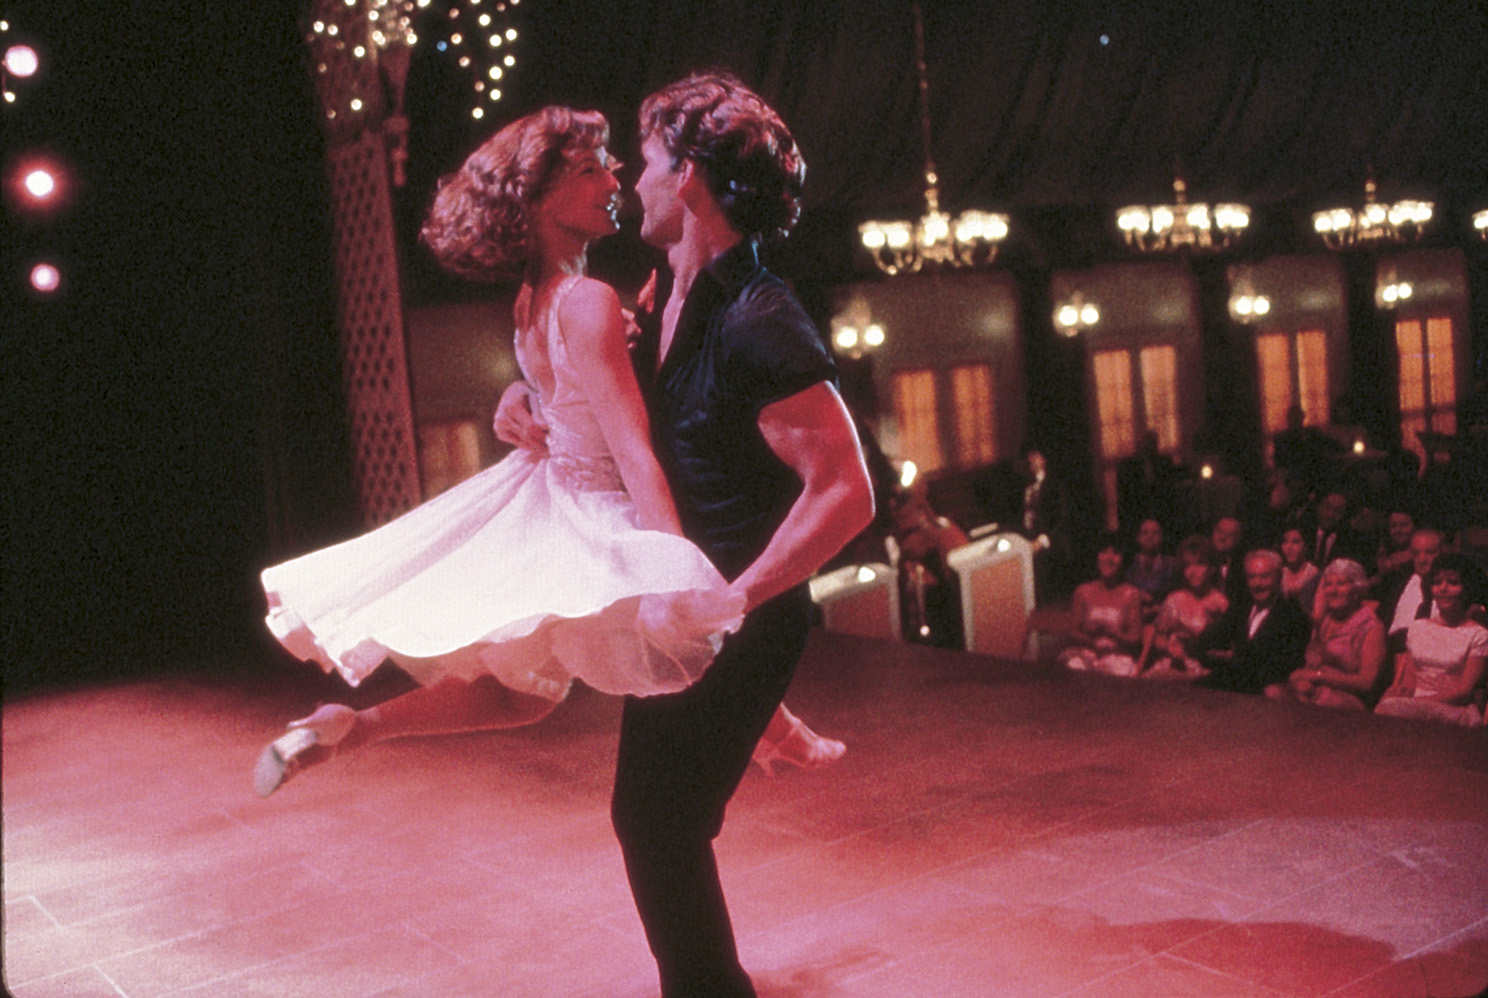 dirty-dancing-1-courtesy-lions-gate-films-inc